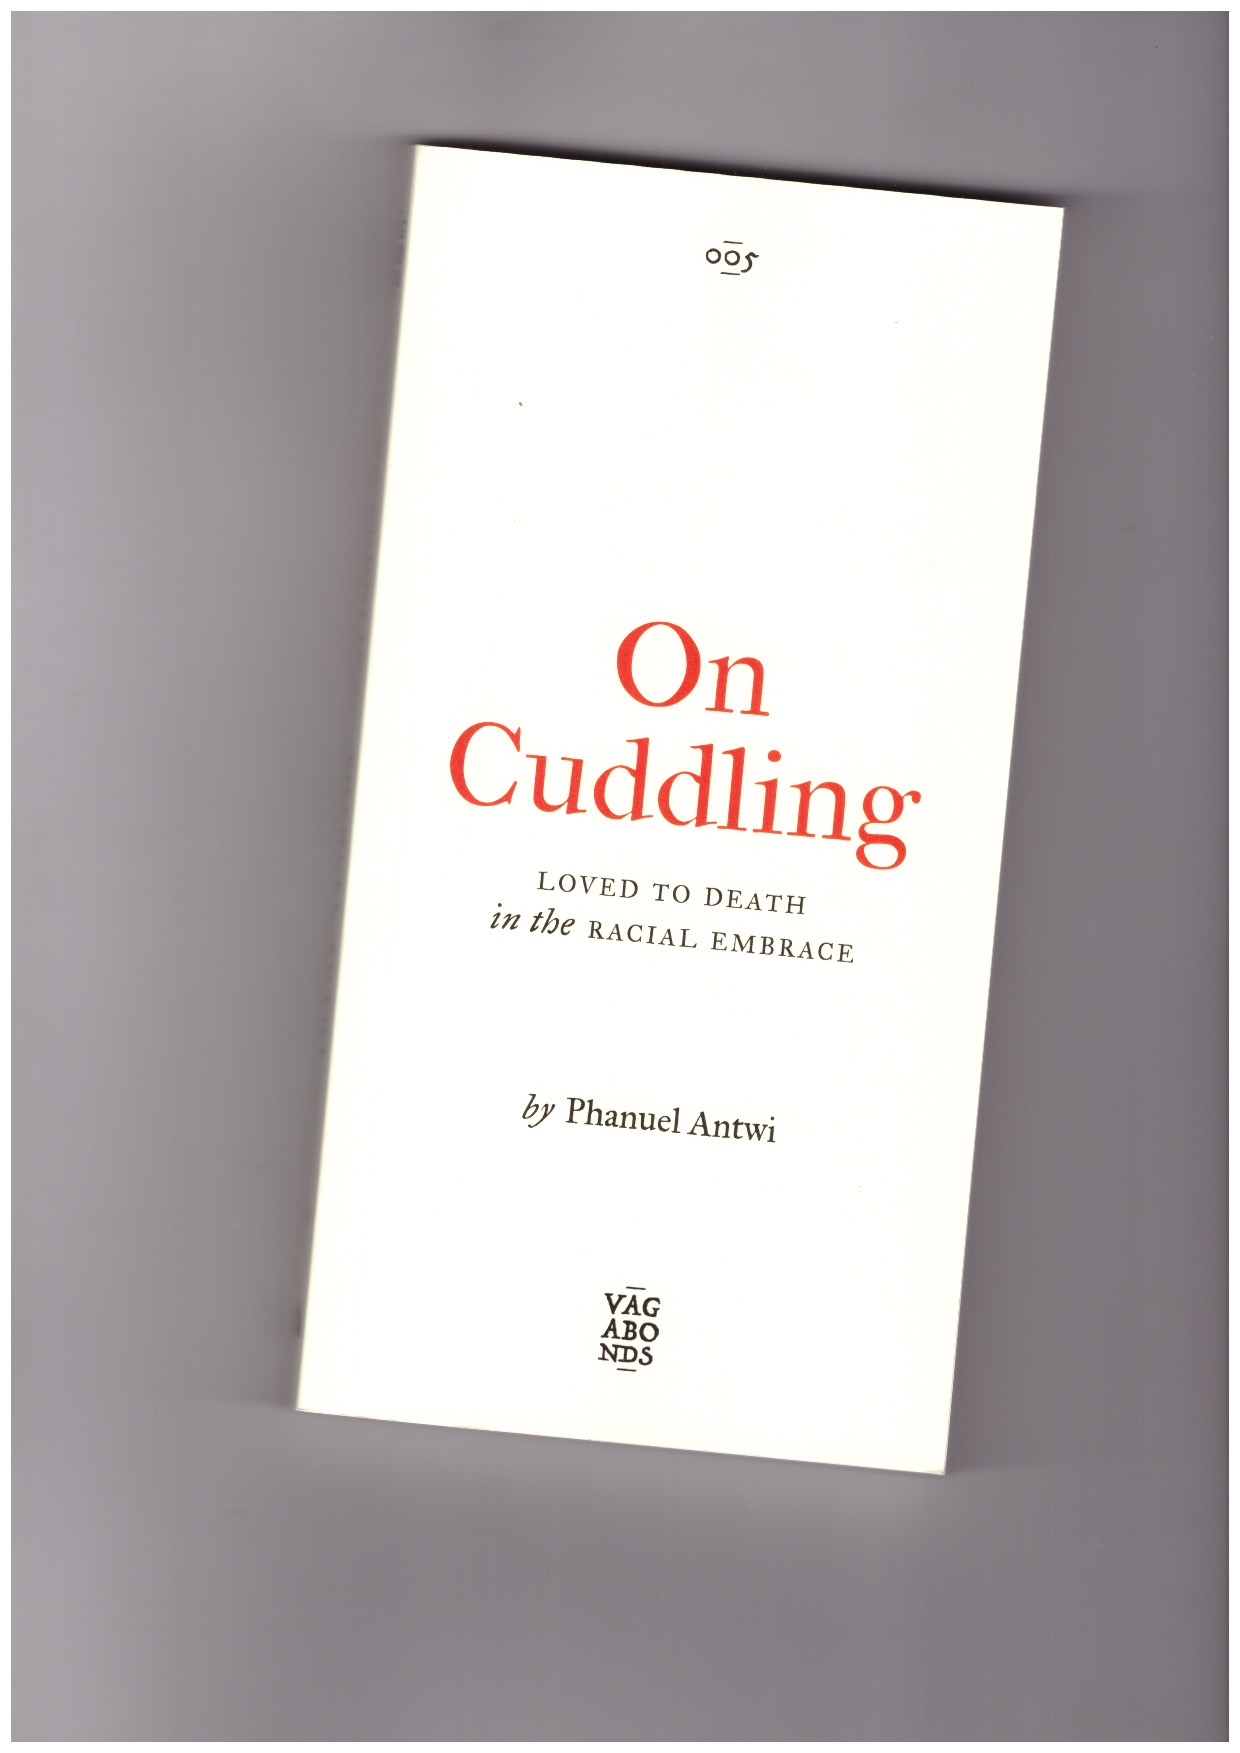 ANTWI, Phanuel - On Cuddling. Loved to Death in the Racial Embrace